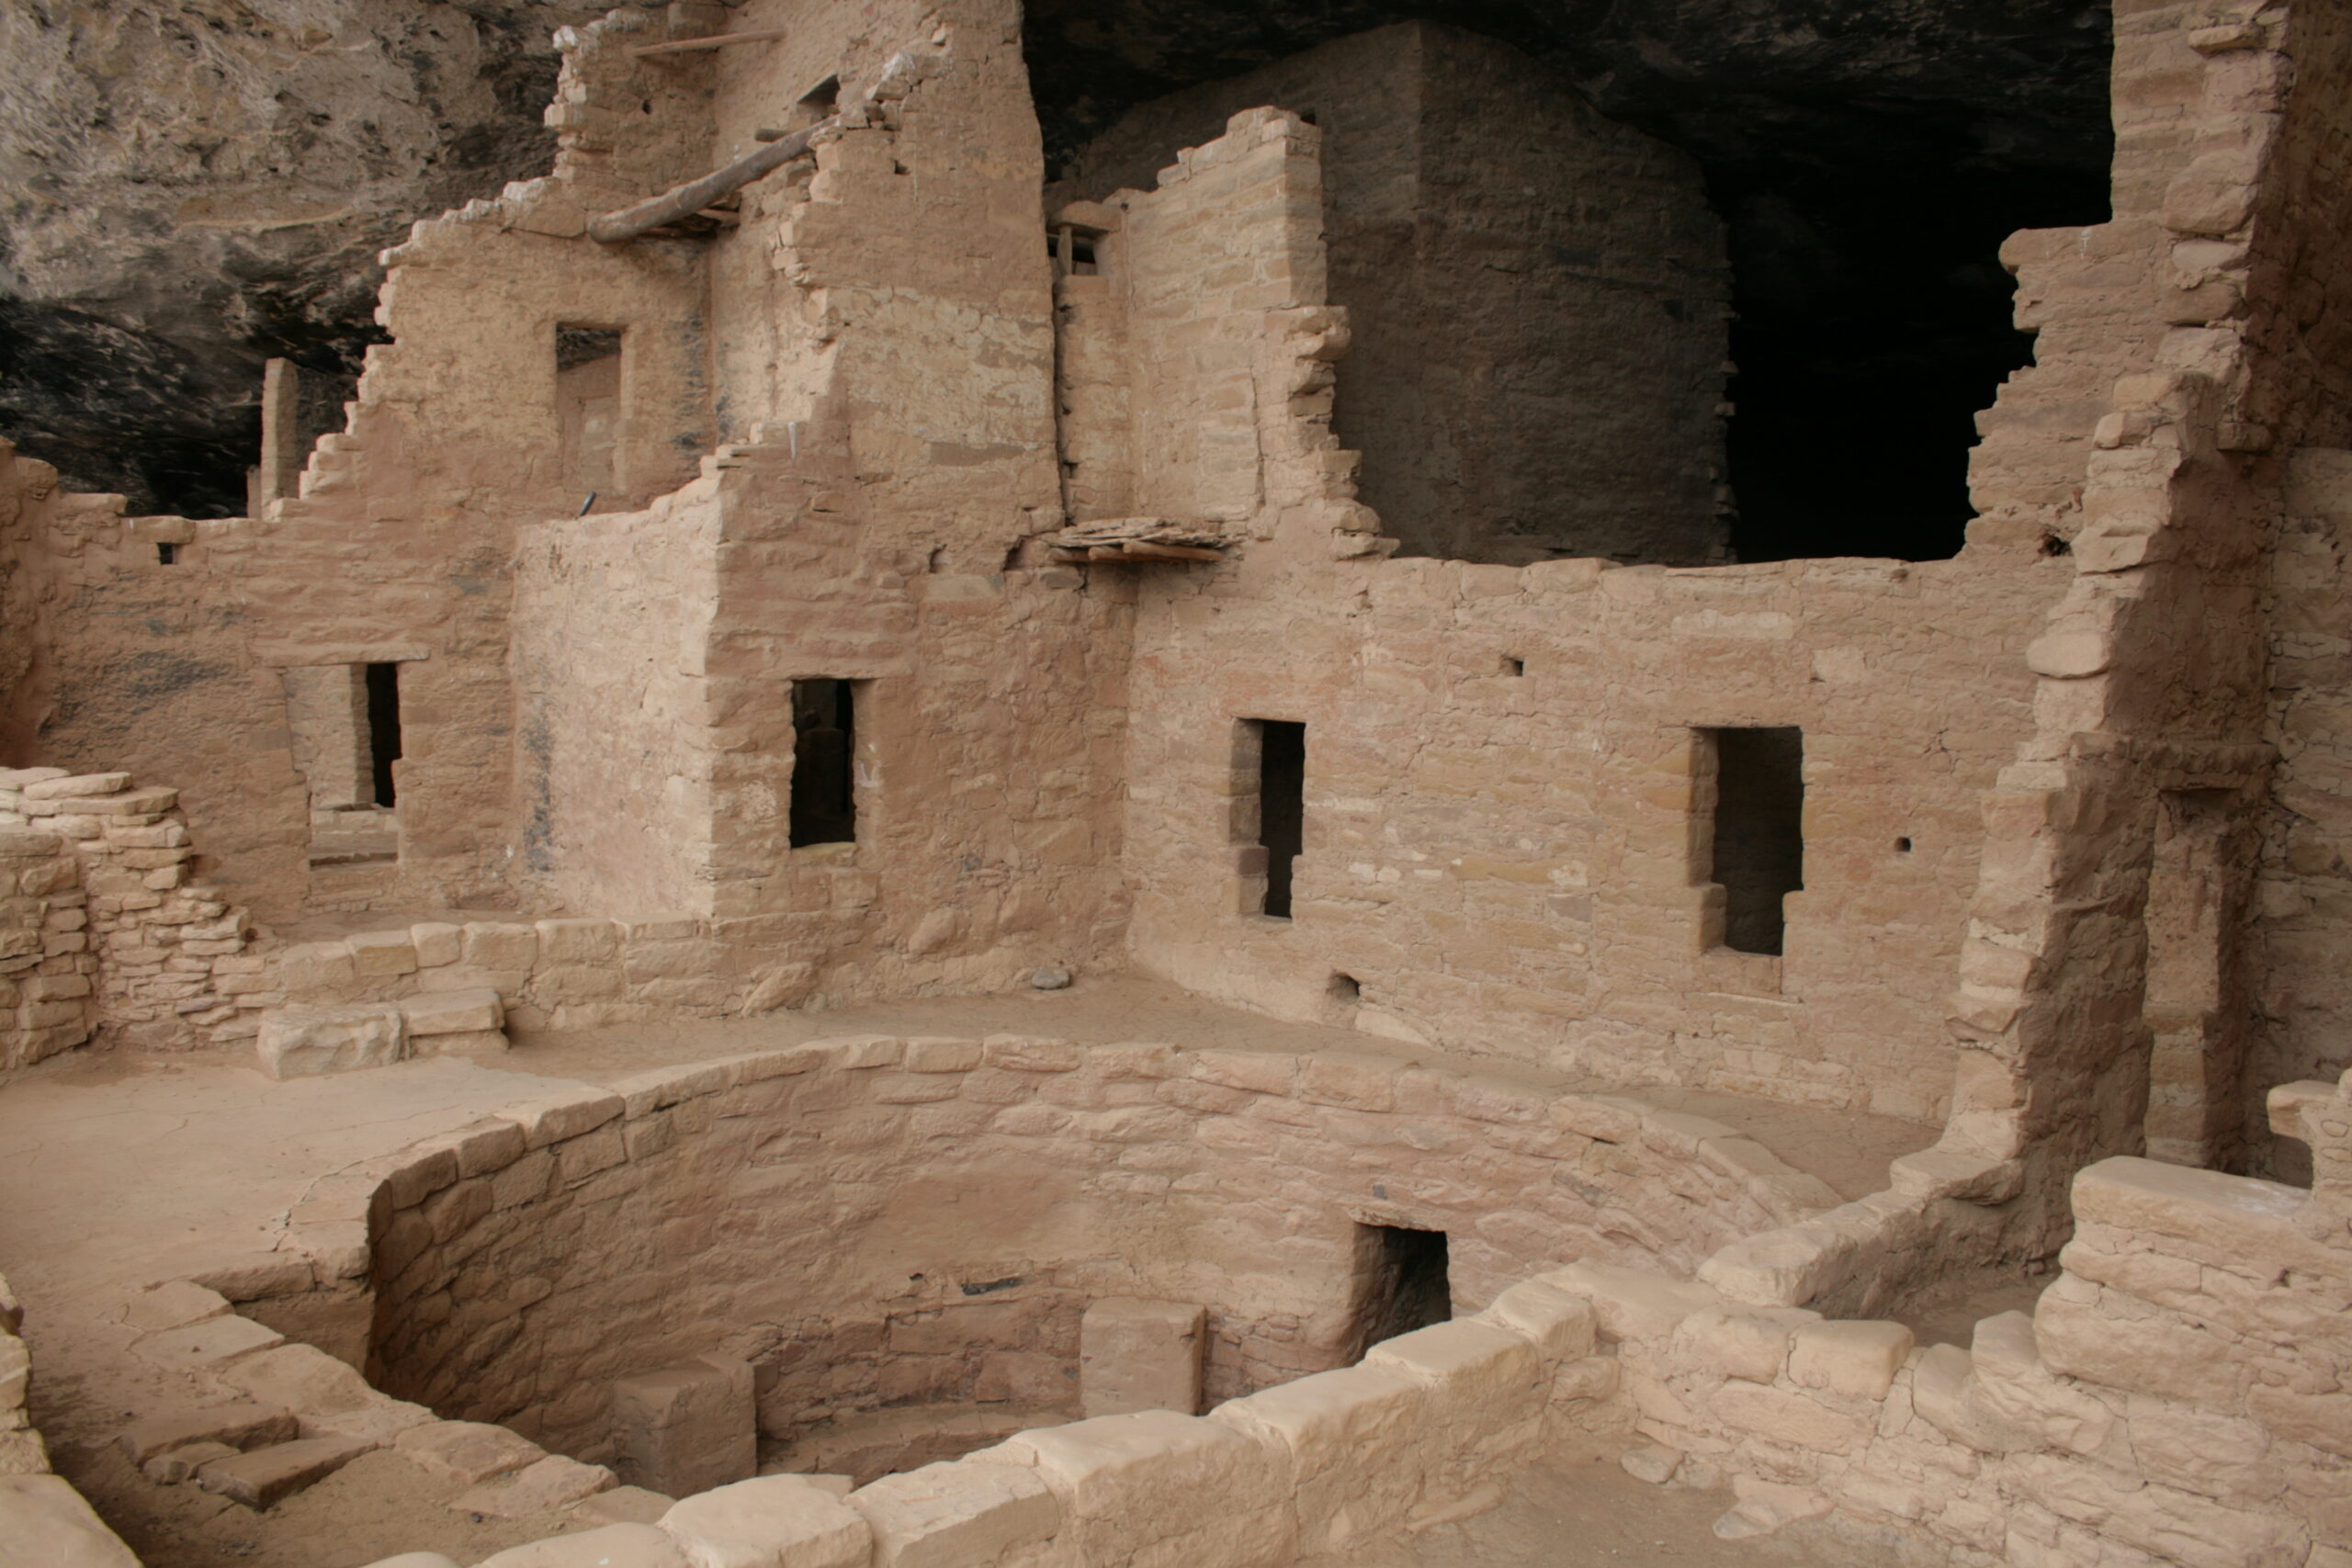 An uncovered kiva, a room used for ancient Native American religious ceremonies, in Spruce Tree House in Mesa Verde National Park